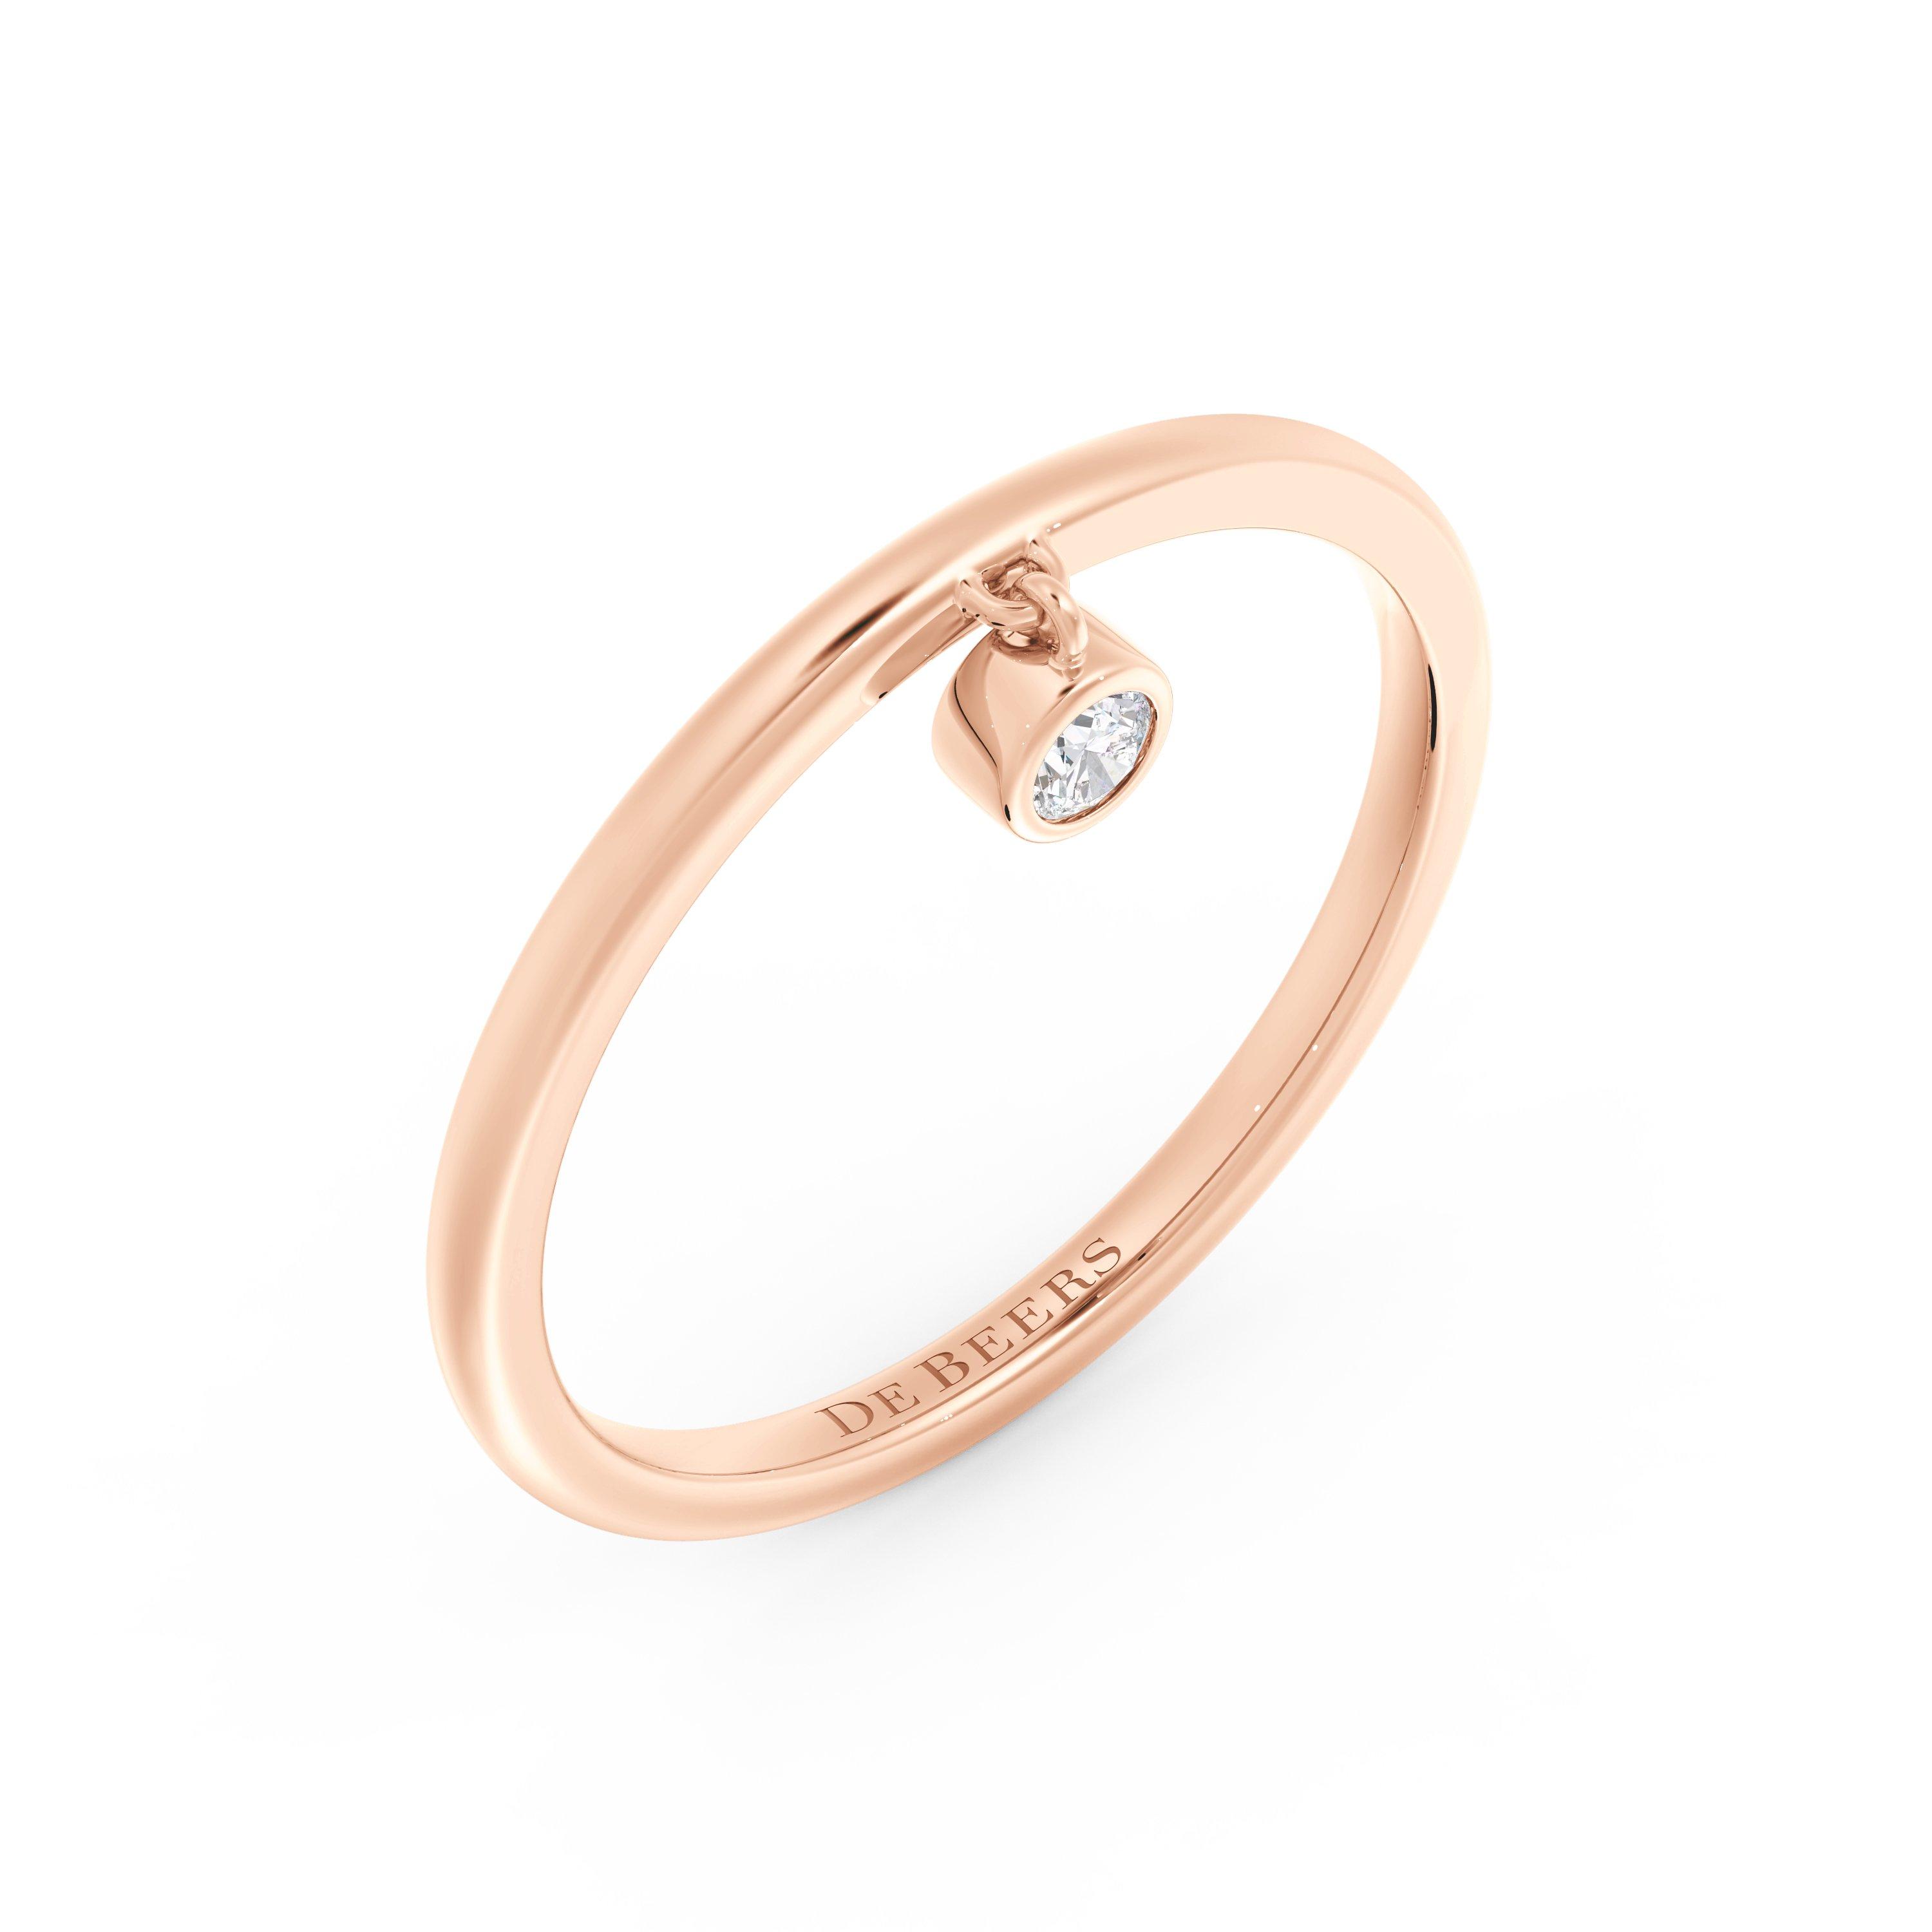 My First De Beers Clea One Diamond Ring in Rose Gold, image 2